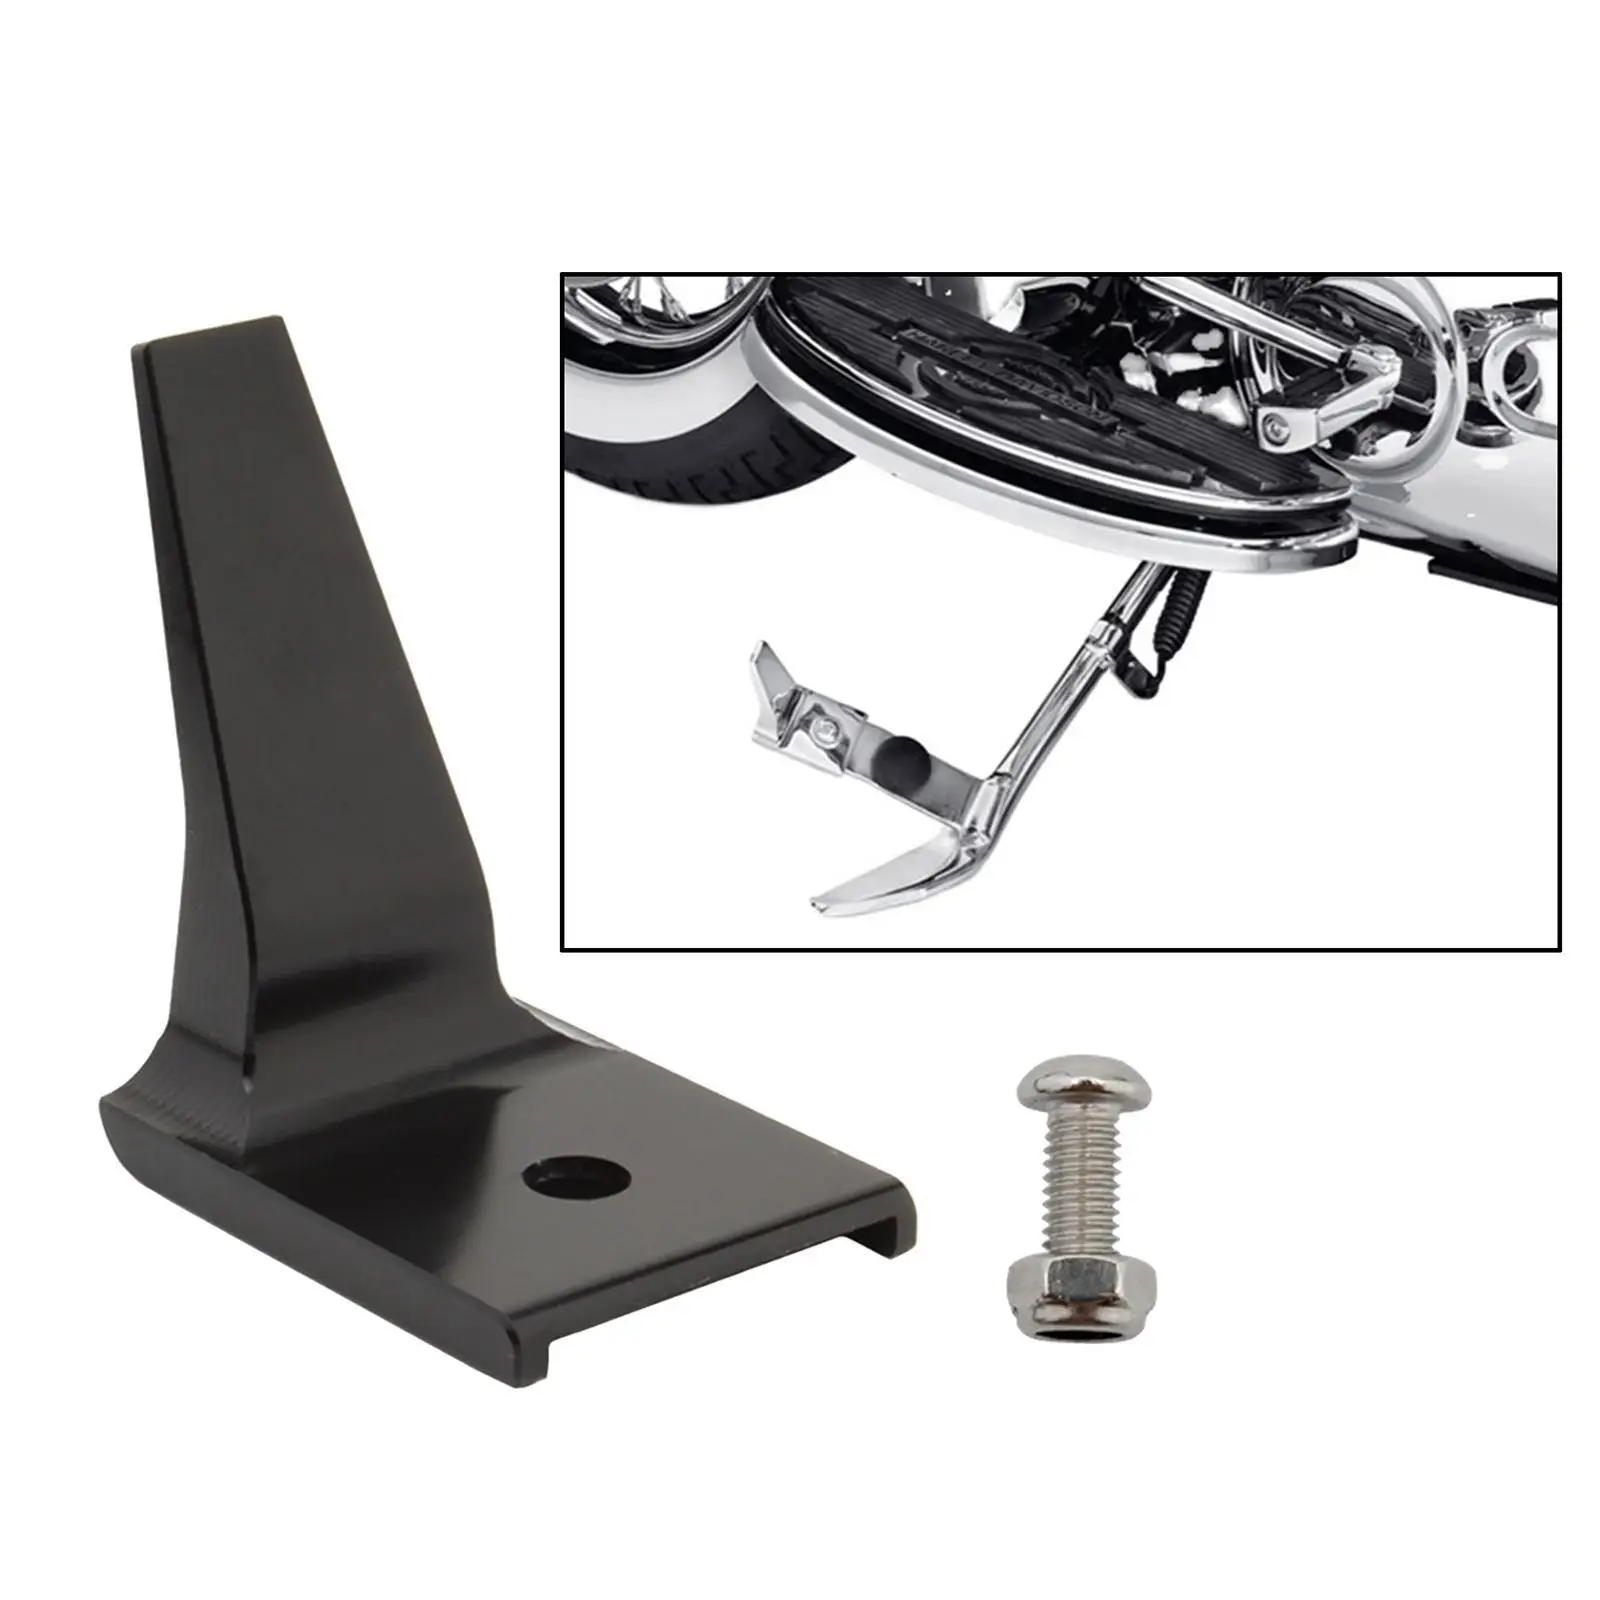 Kickstand Side Stand Extension Kit for     Deluxe EFI TNI 2007 - 2017  SlimS S 2016- 2017